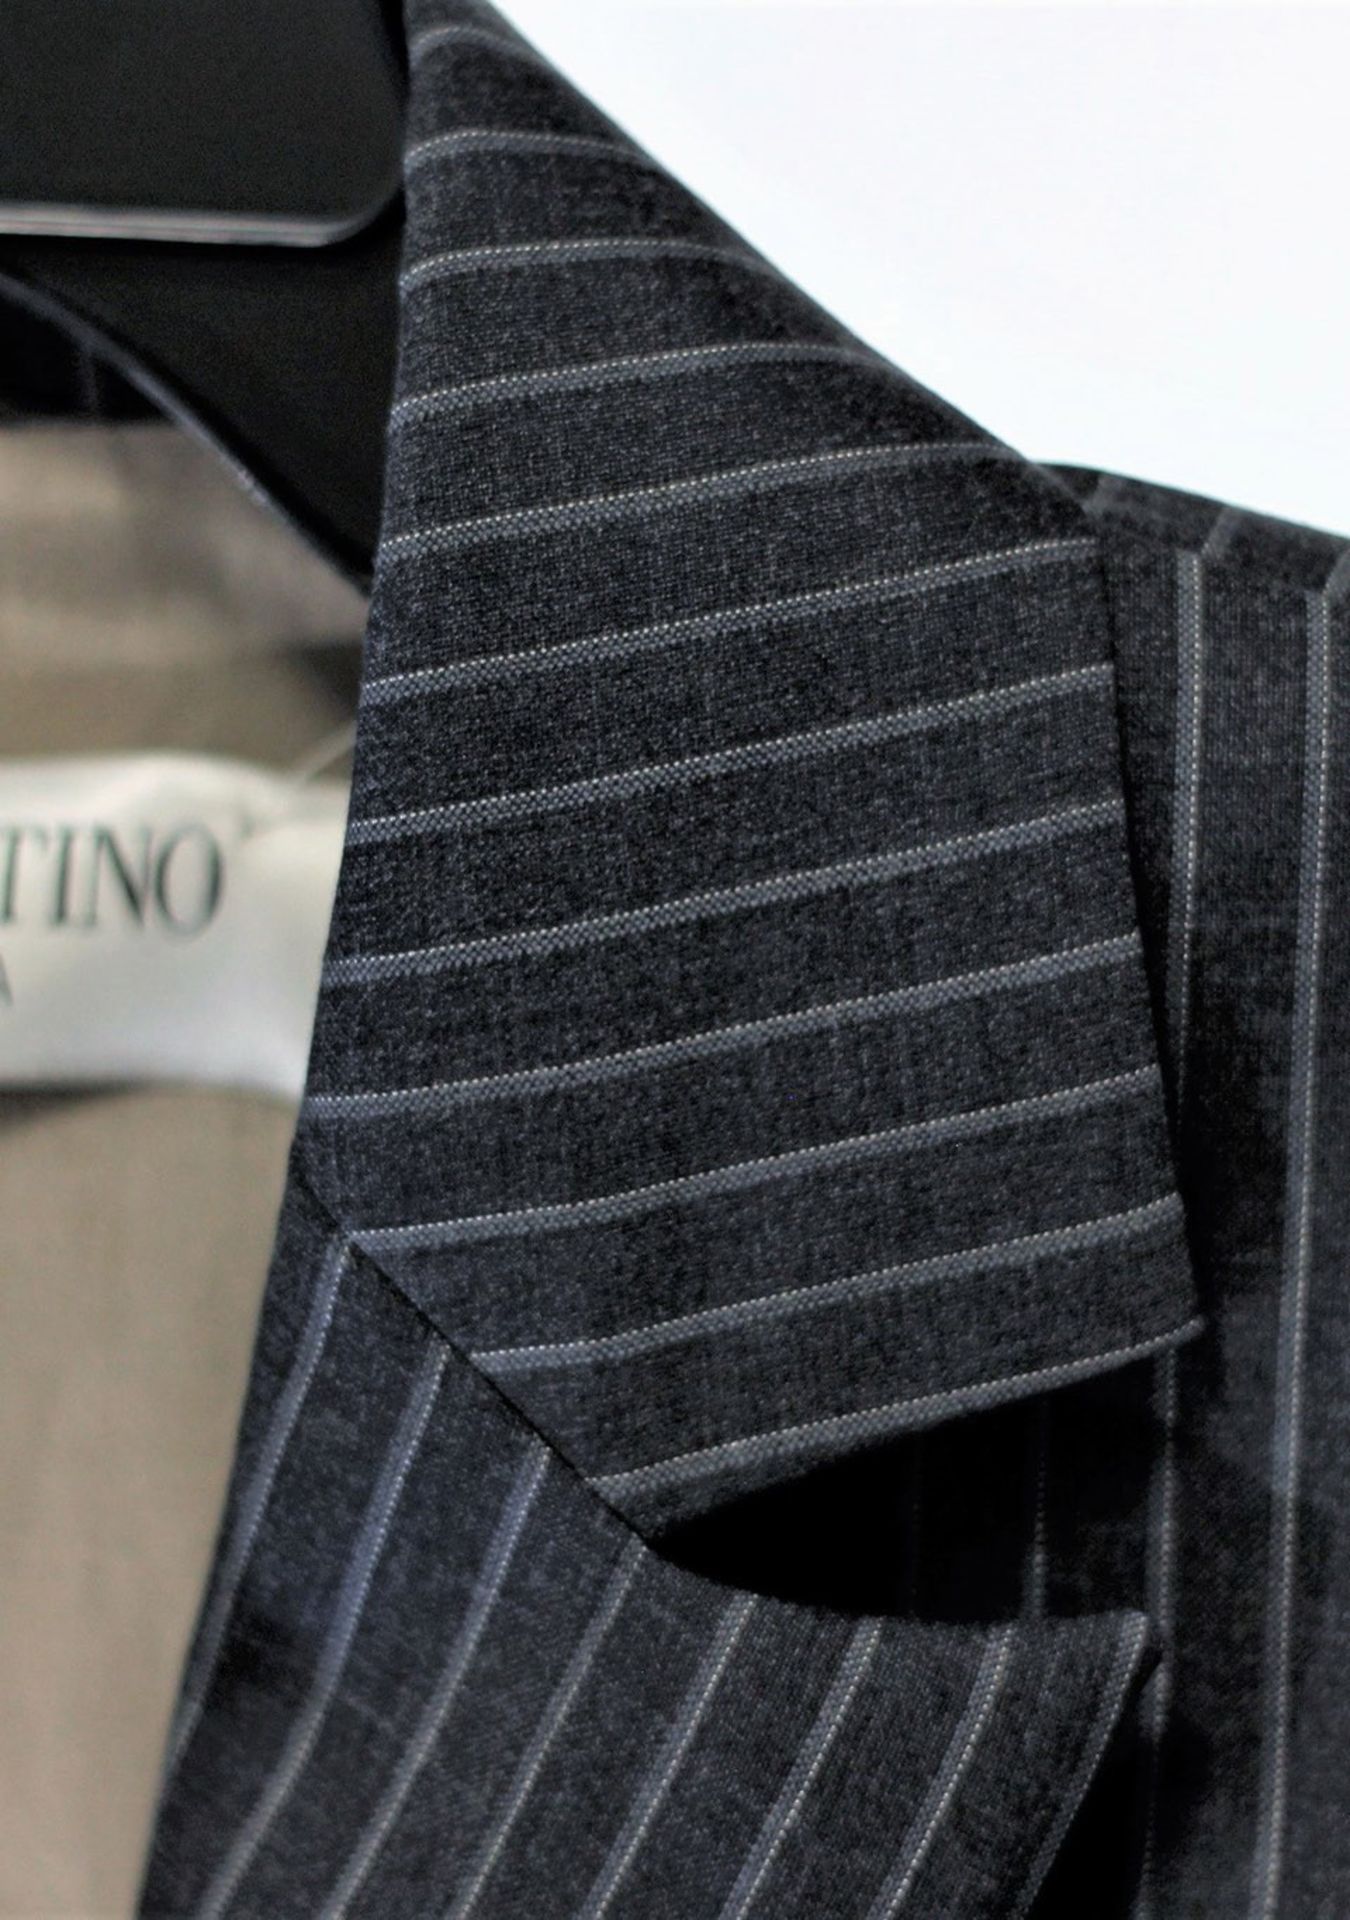 1 x Valentino Roma Grey Stripped Blazer - Size: 18 - Material: Lining 57% Acetate, 43% Cotton. - Image 2 of 7